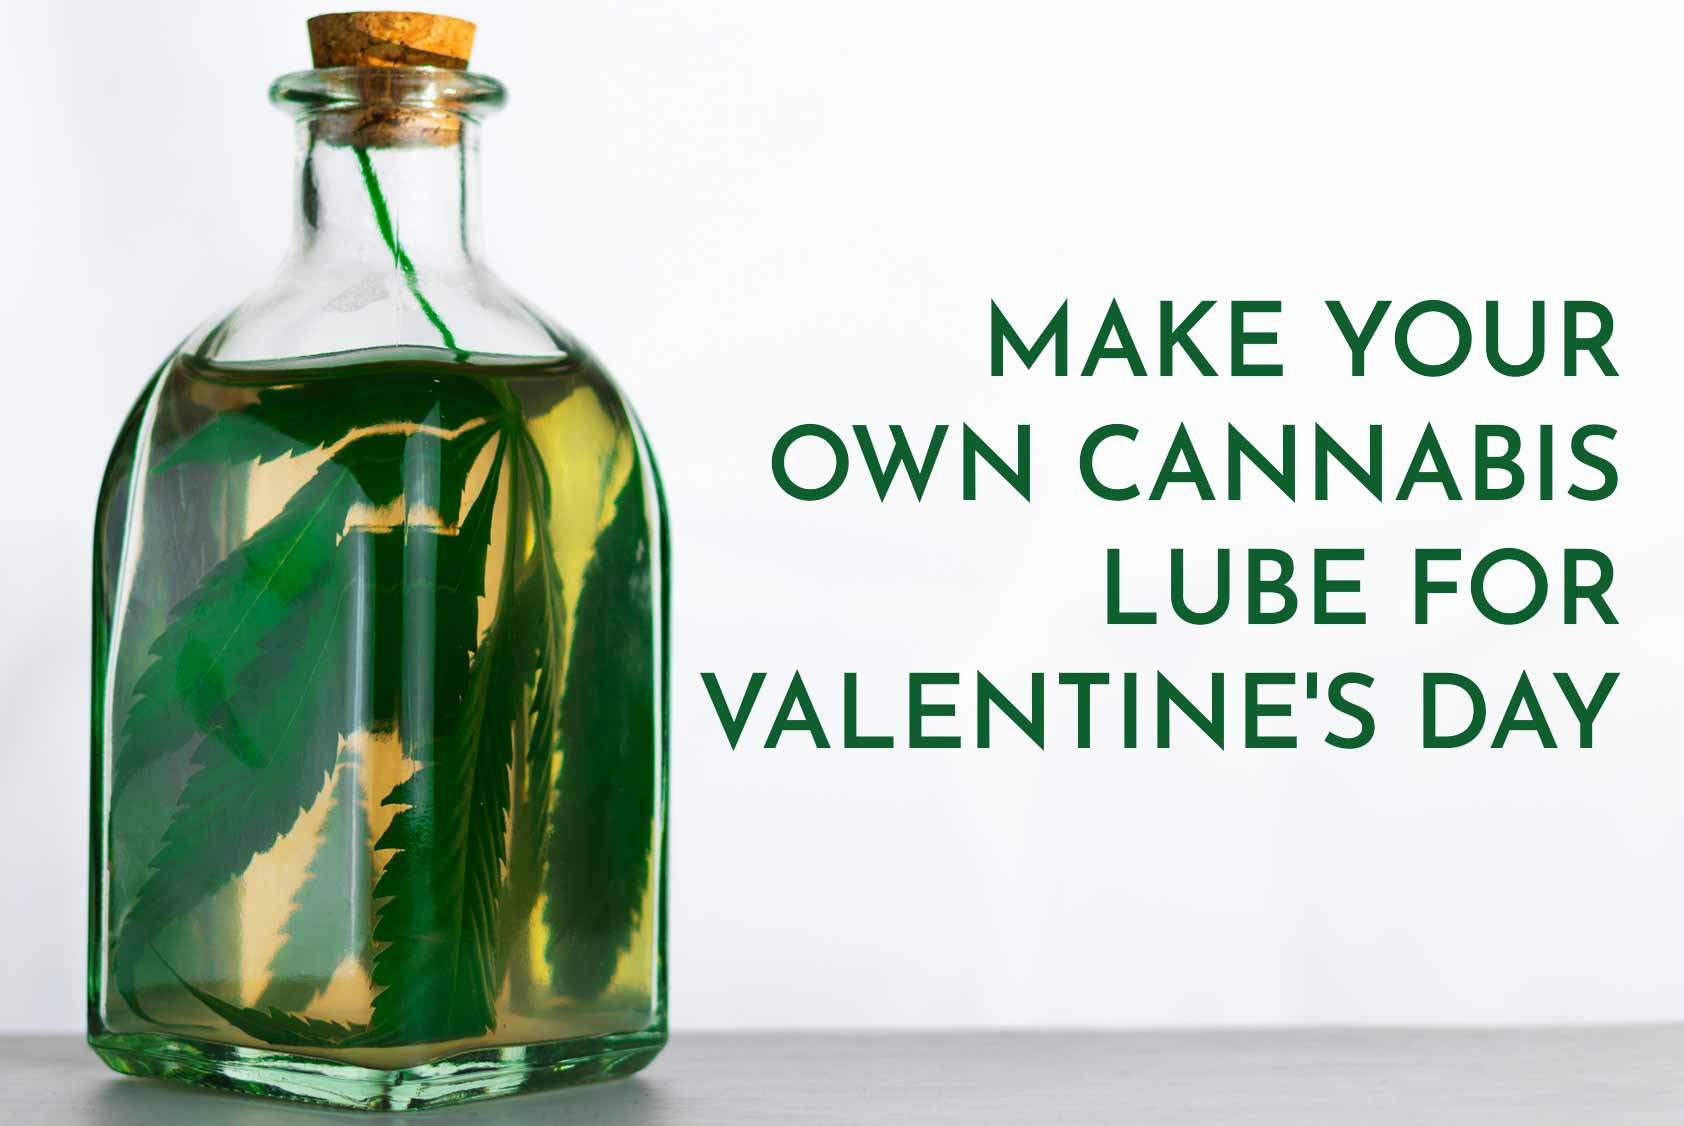 make your own cannabis lube for valentine's day by Puffland